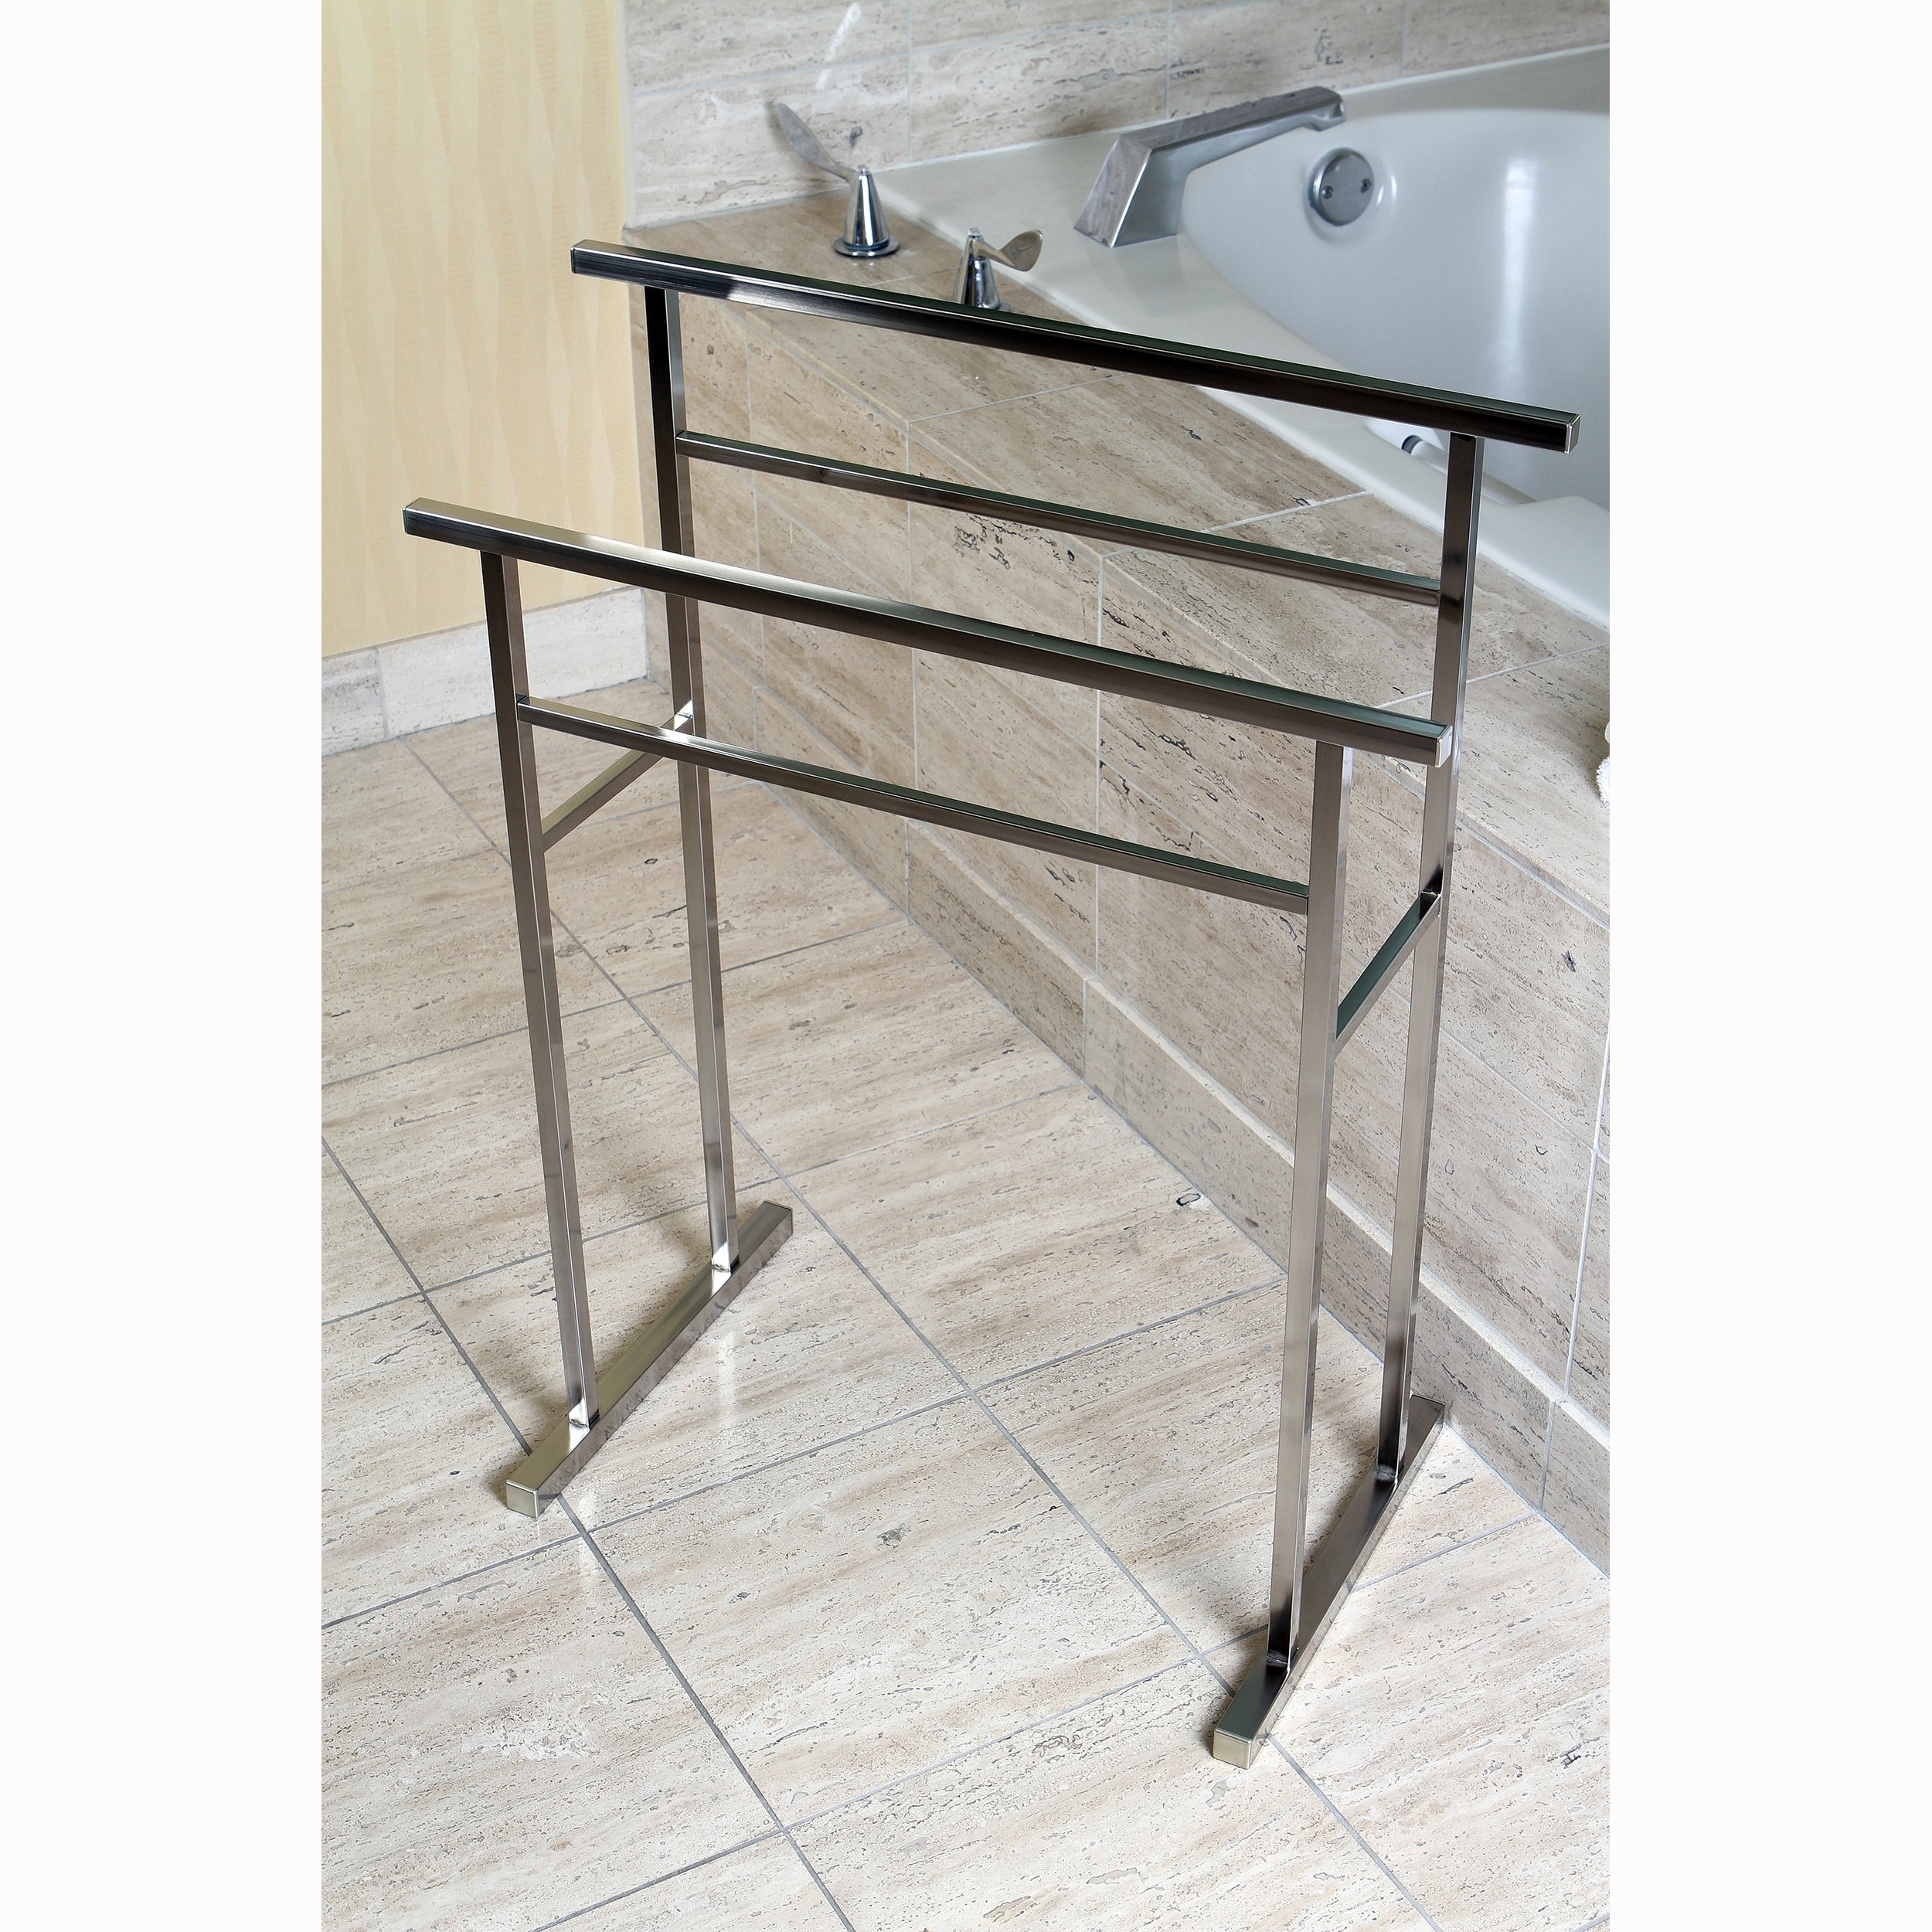 https://ak1.ostkcdn.com/images/products/is/images/direct/0fc75941330cf117218b0664bb550017ccb00bb8/Edenscape-Freestanding-2-Tier-Towel-Rack.jpg